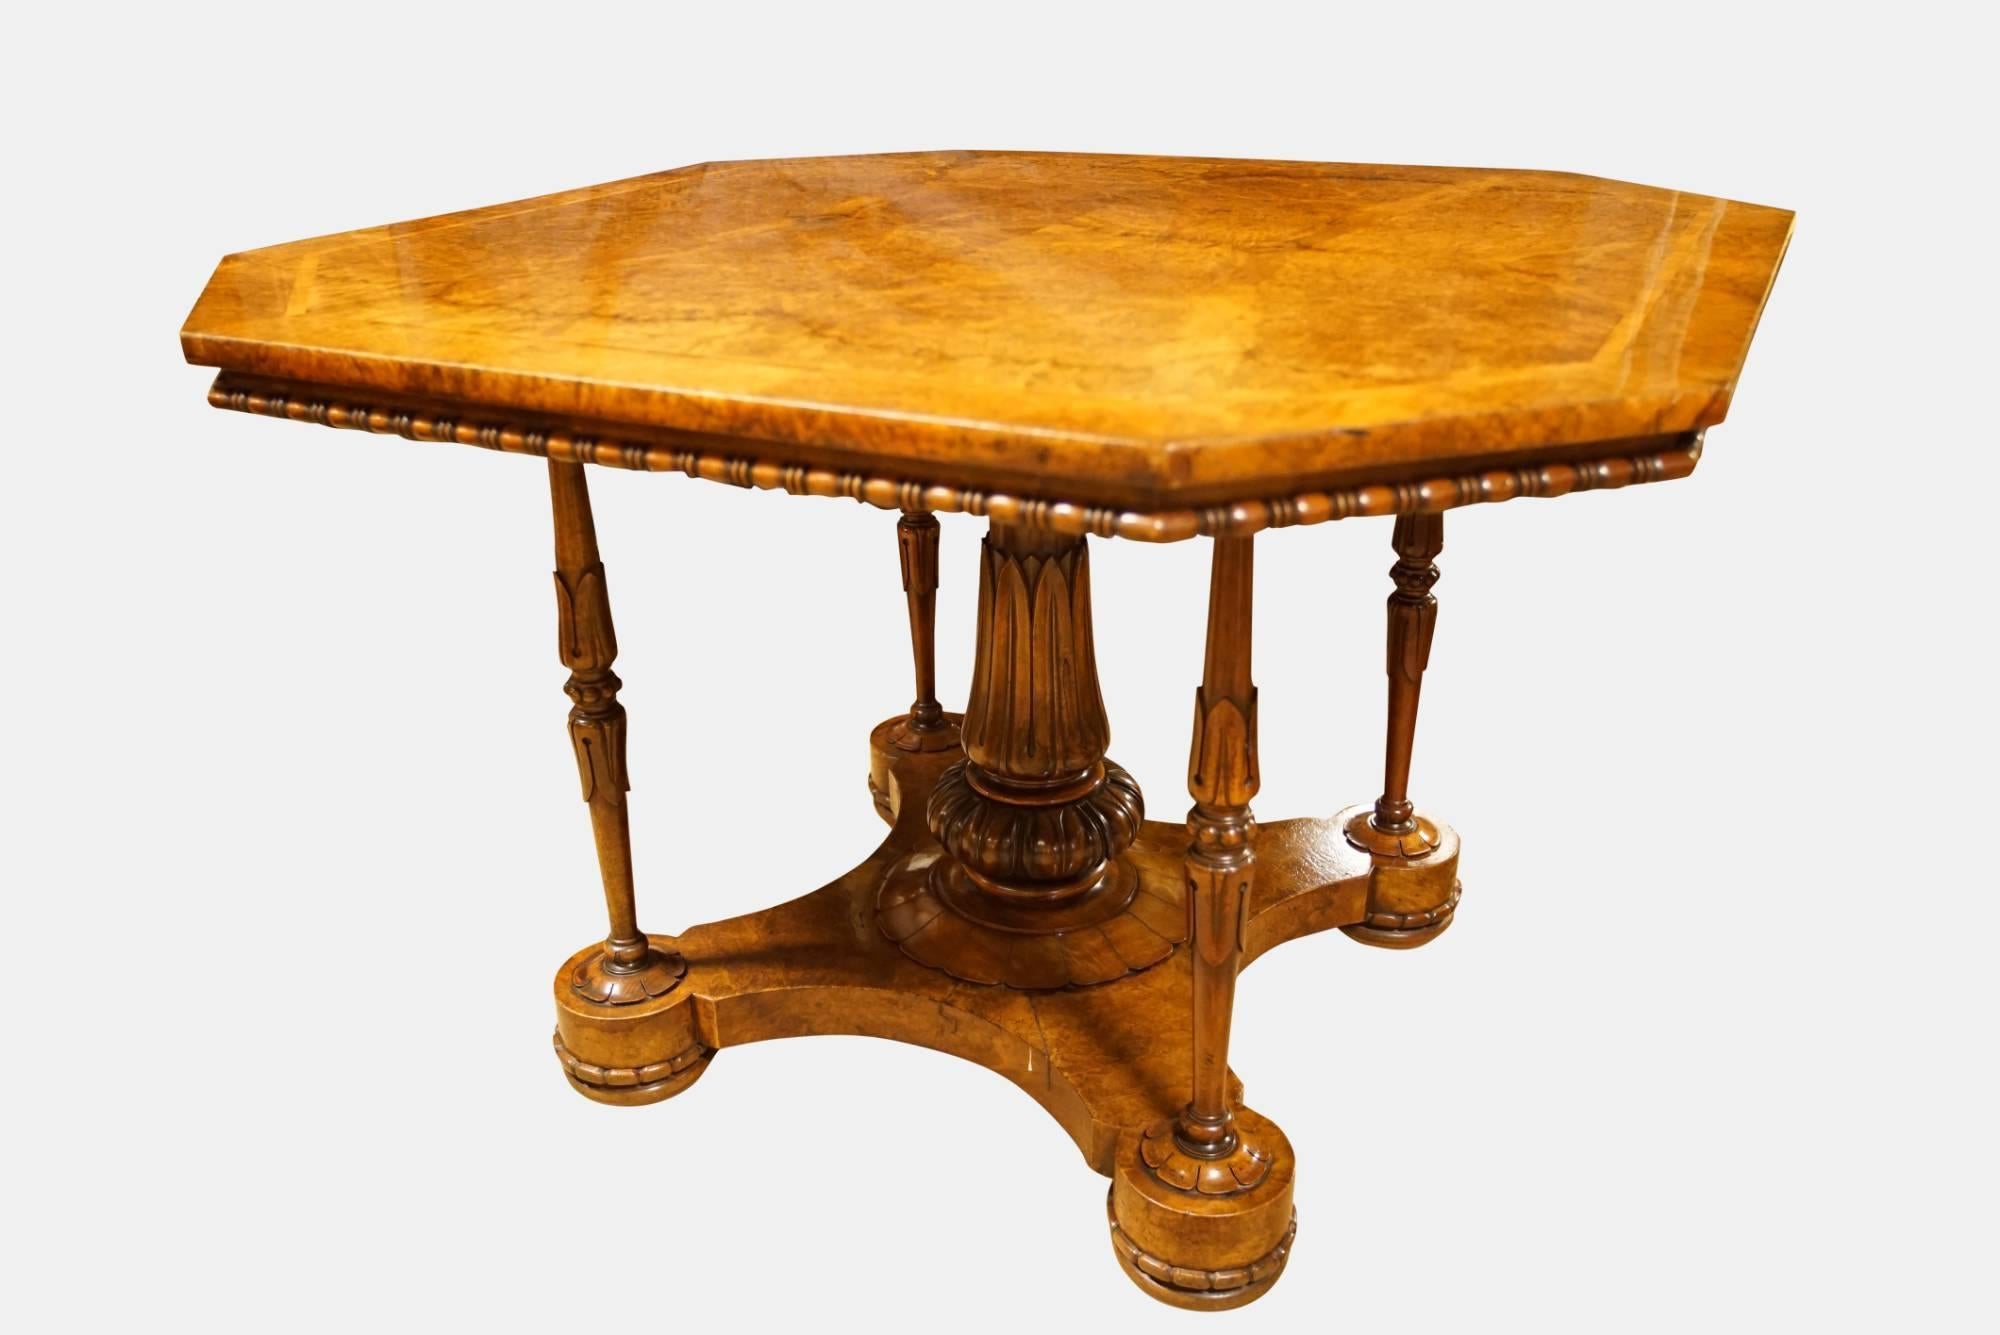 A fine burr walnut octagonal centre table in the manner of Holland & Sons,

circa 1865.